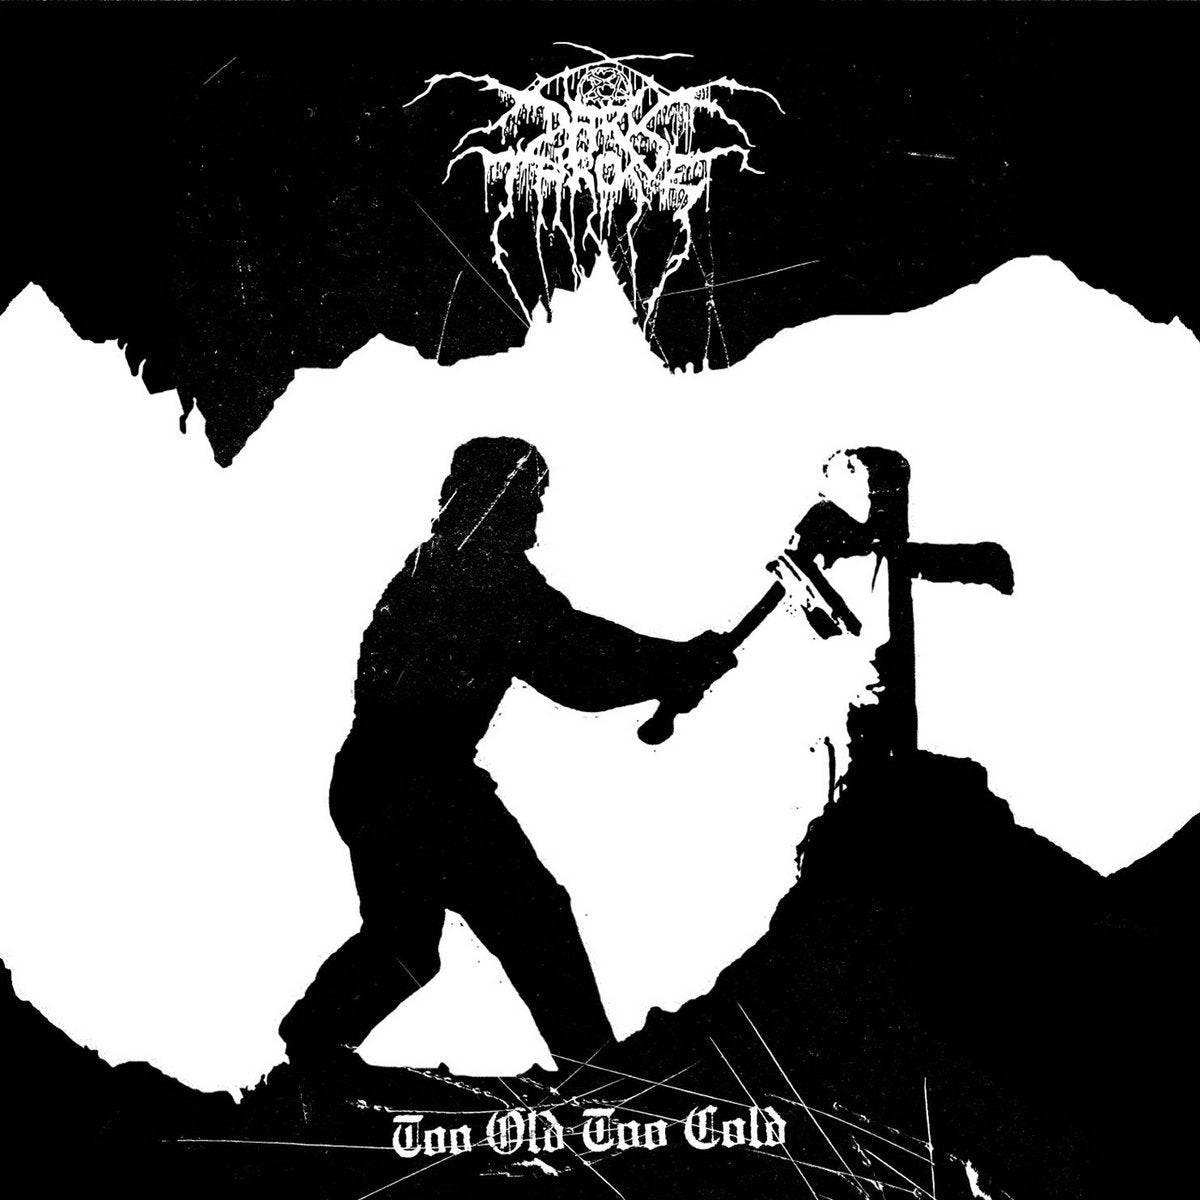 DARKTHRONE – Too Old Too Cold 12" EP